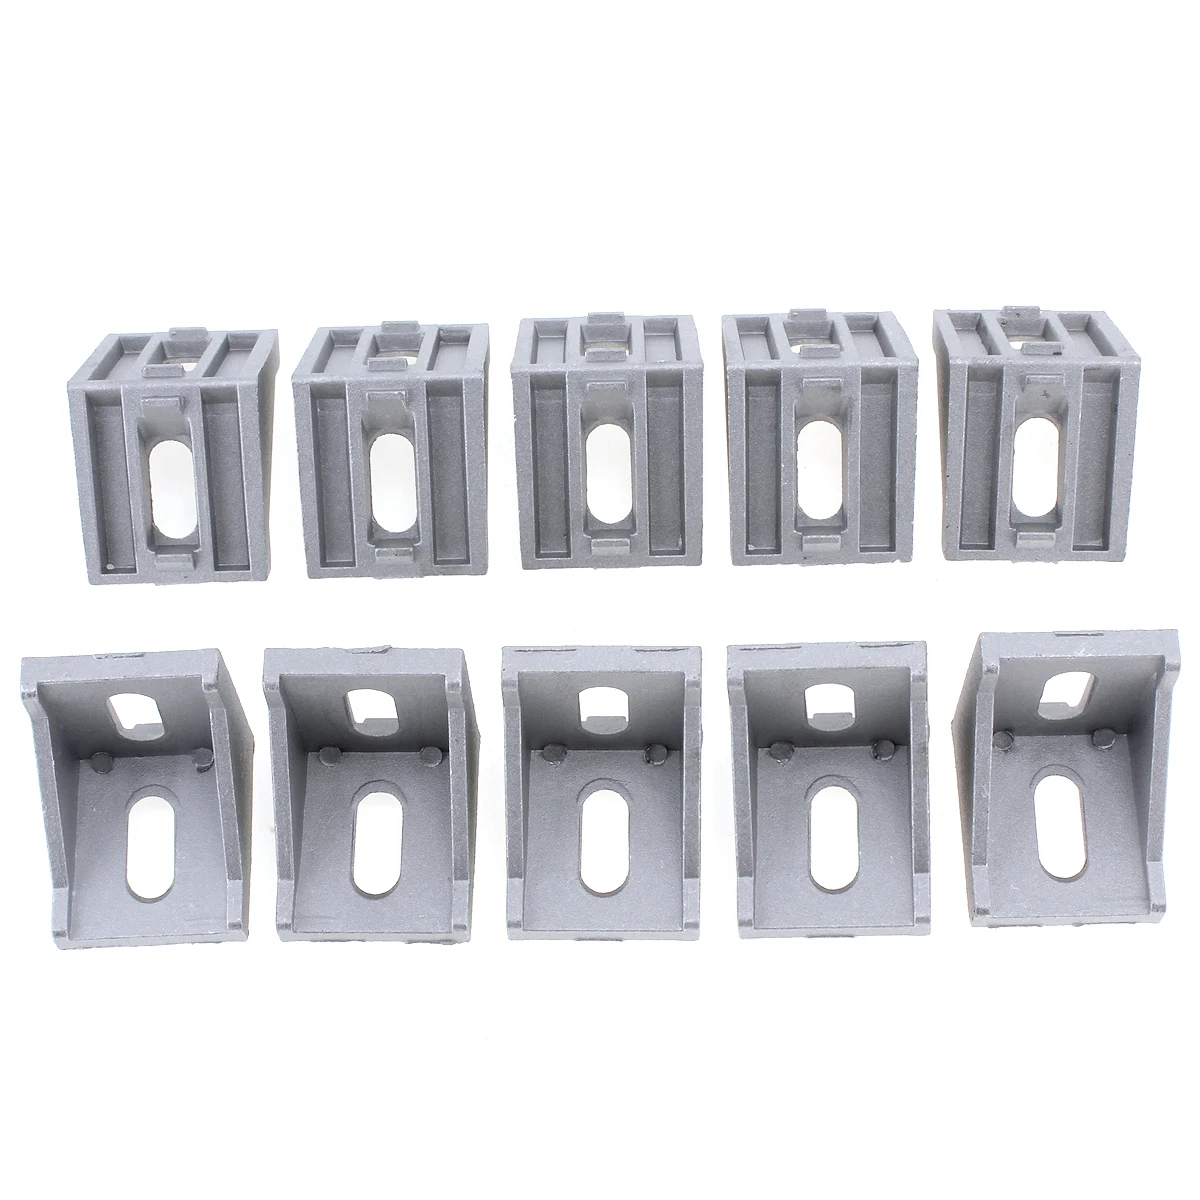 

10pcs 4040 Aluminum Angle Code with Nut Hole Support T Slot Profile Frames Extrusion Bracket for Connecting The Flow Profile